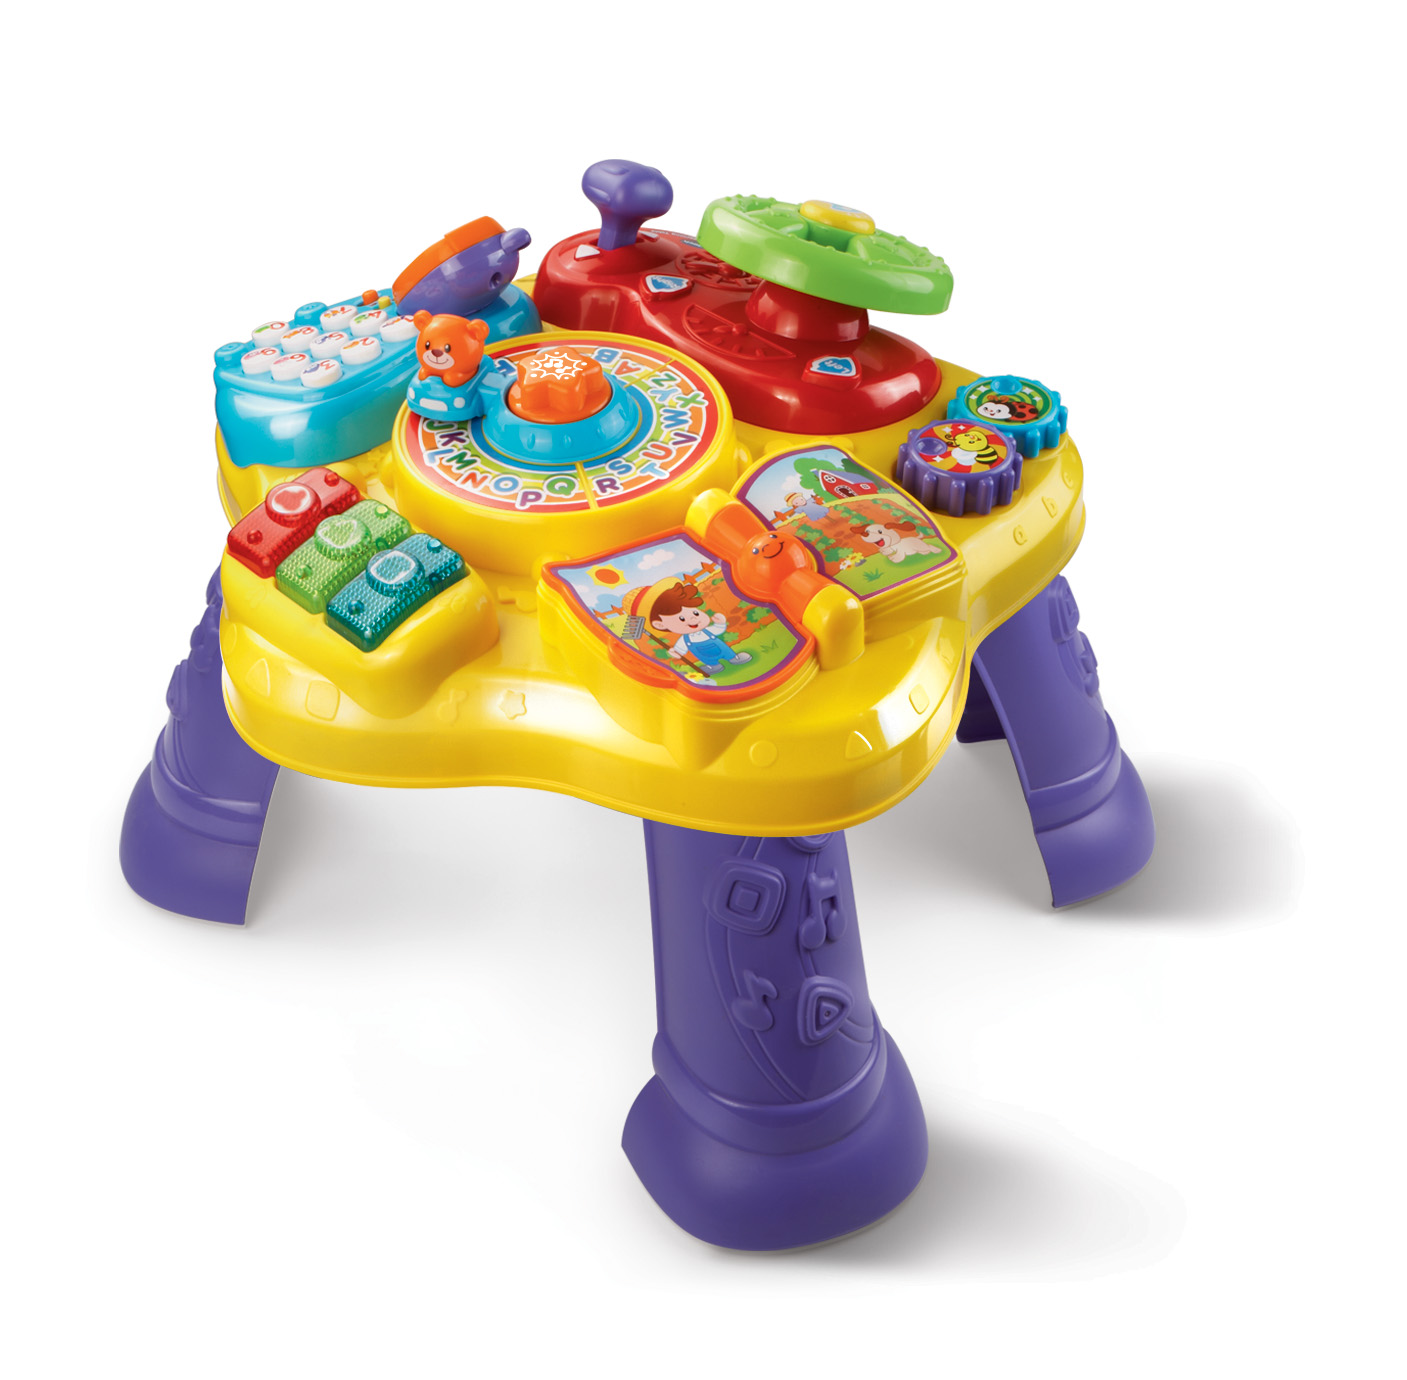 Magic Star Learning Table VTech - image 1 of 11